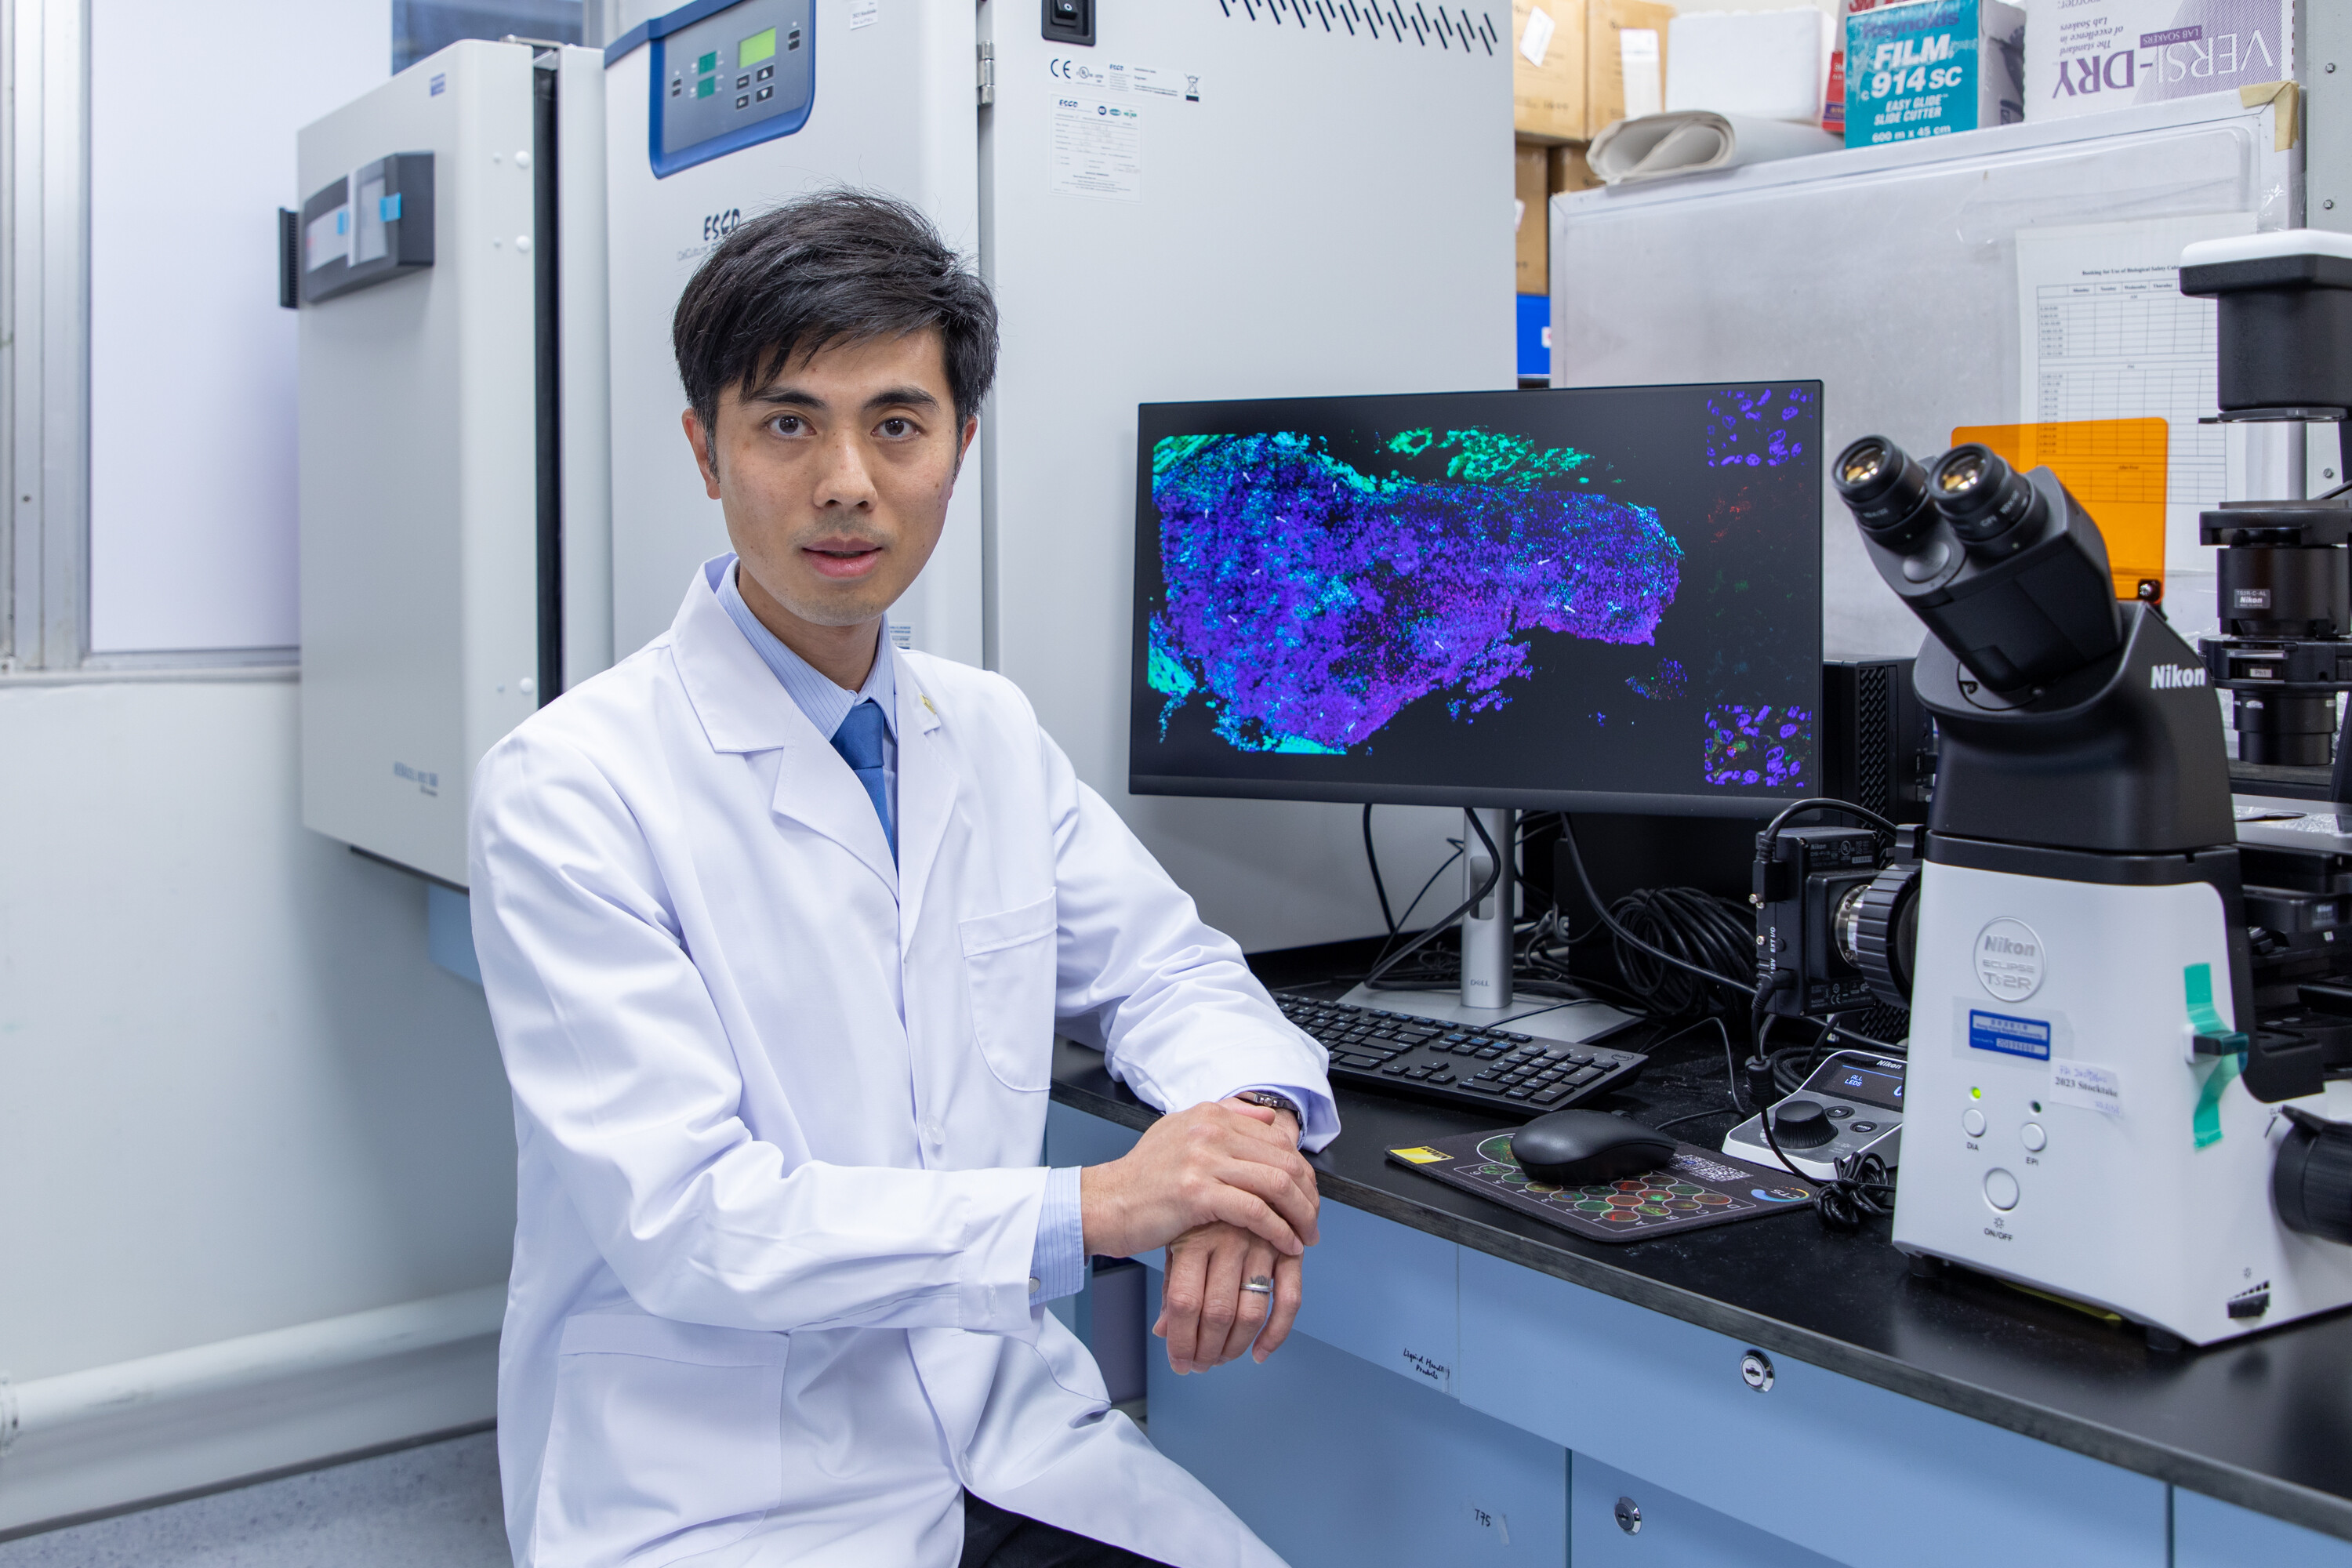 A collaborative research team led by Dr Allen Cheung Ka-loon, Assistant Professor of the Department of Biology at HKBU, has investigated the detection of HCMV in urine for the continuous monitoring of end-organ disease risk in HIV-1 patients.